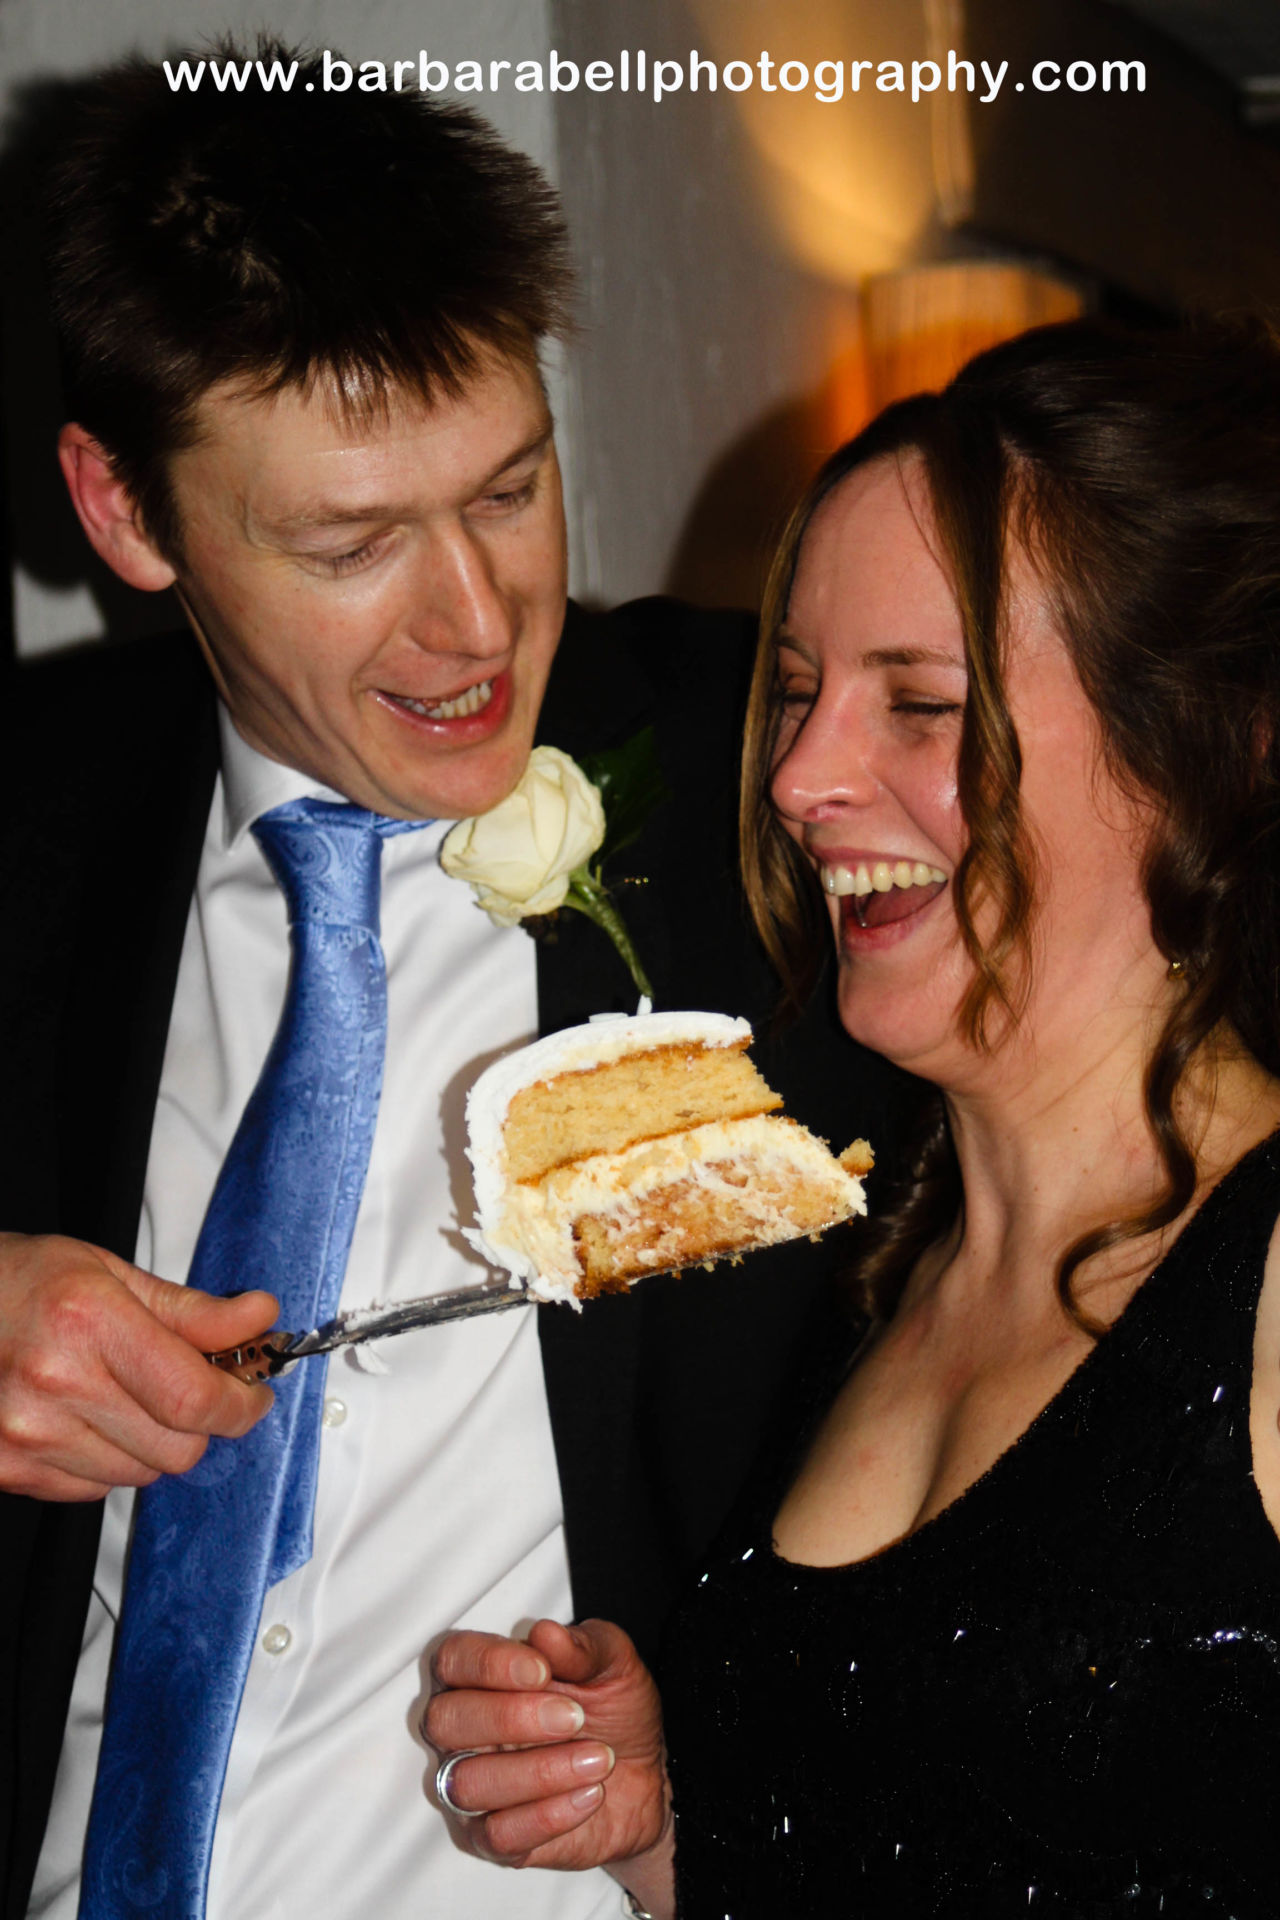 The cutting of the cake and the feeding to the new bride take on a new spin.